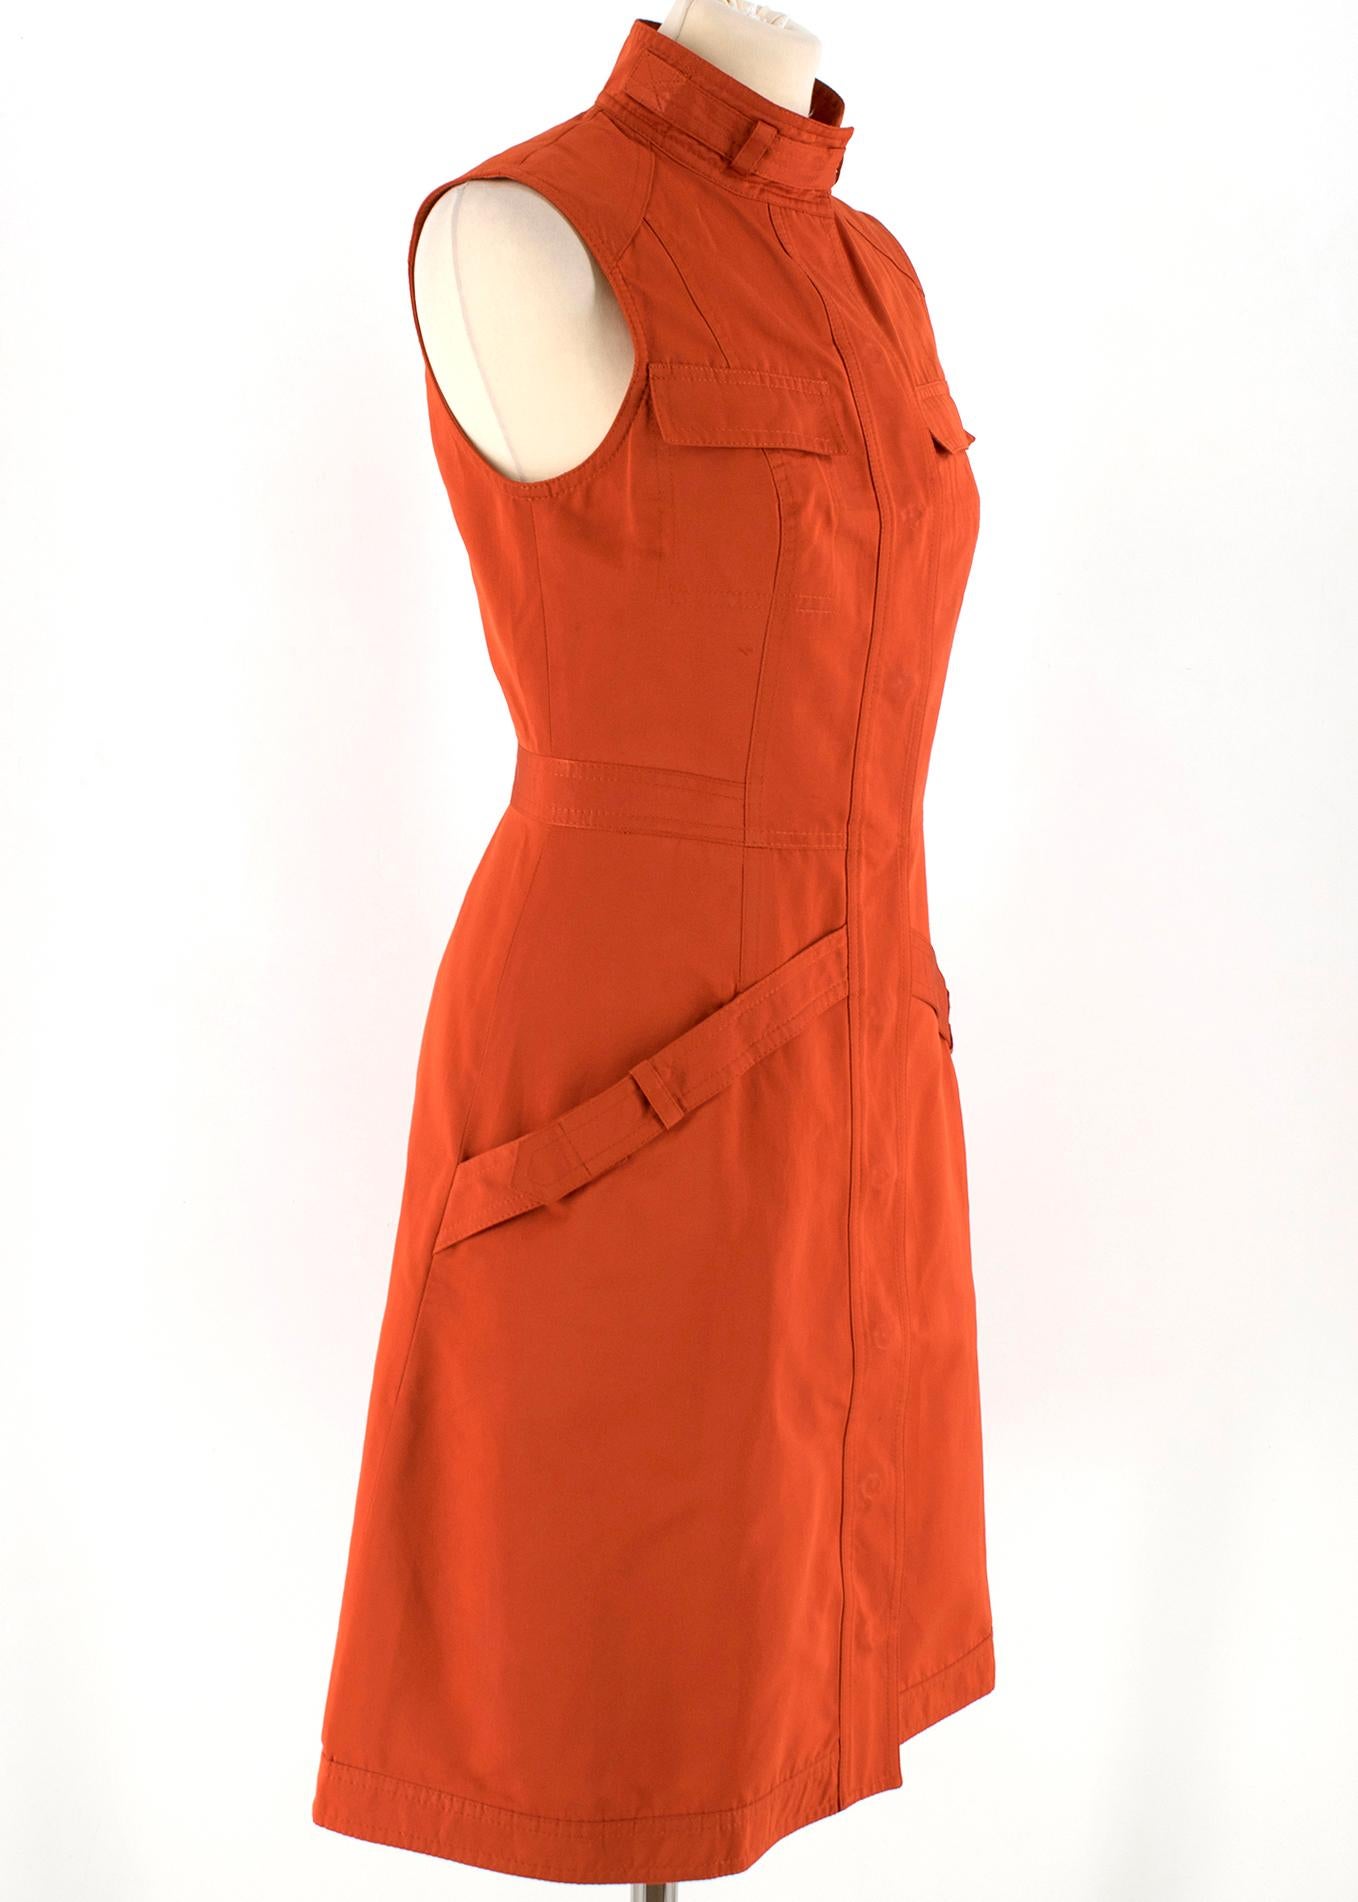 Derek Lam Brick Orange Sleeveless Utility Dress

- This timeless classic dress from Derek Lam is a fantastic piece 
- This is made from 60% Polyester and 40% Cotton
- This sleeveless style features a single breasted buttoned fastening and handy